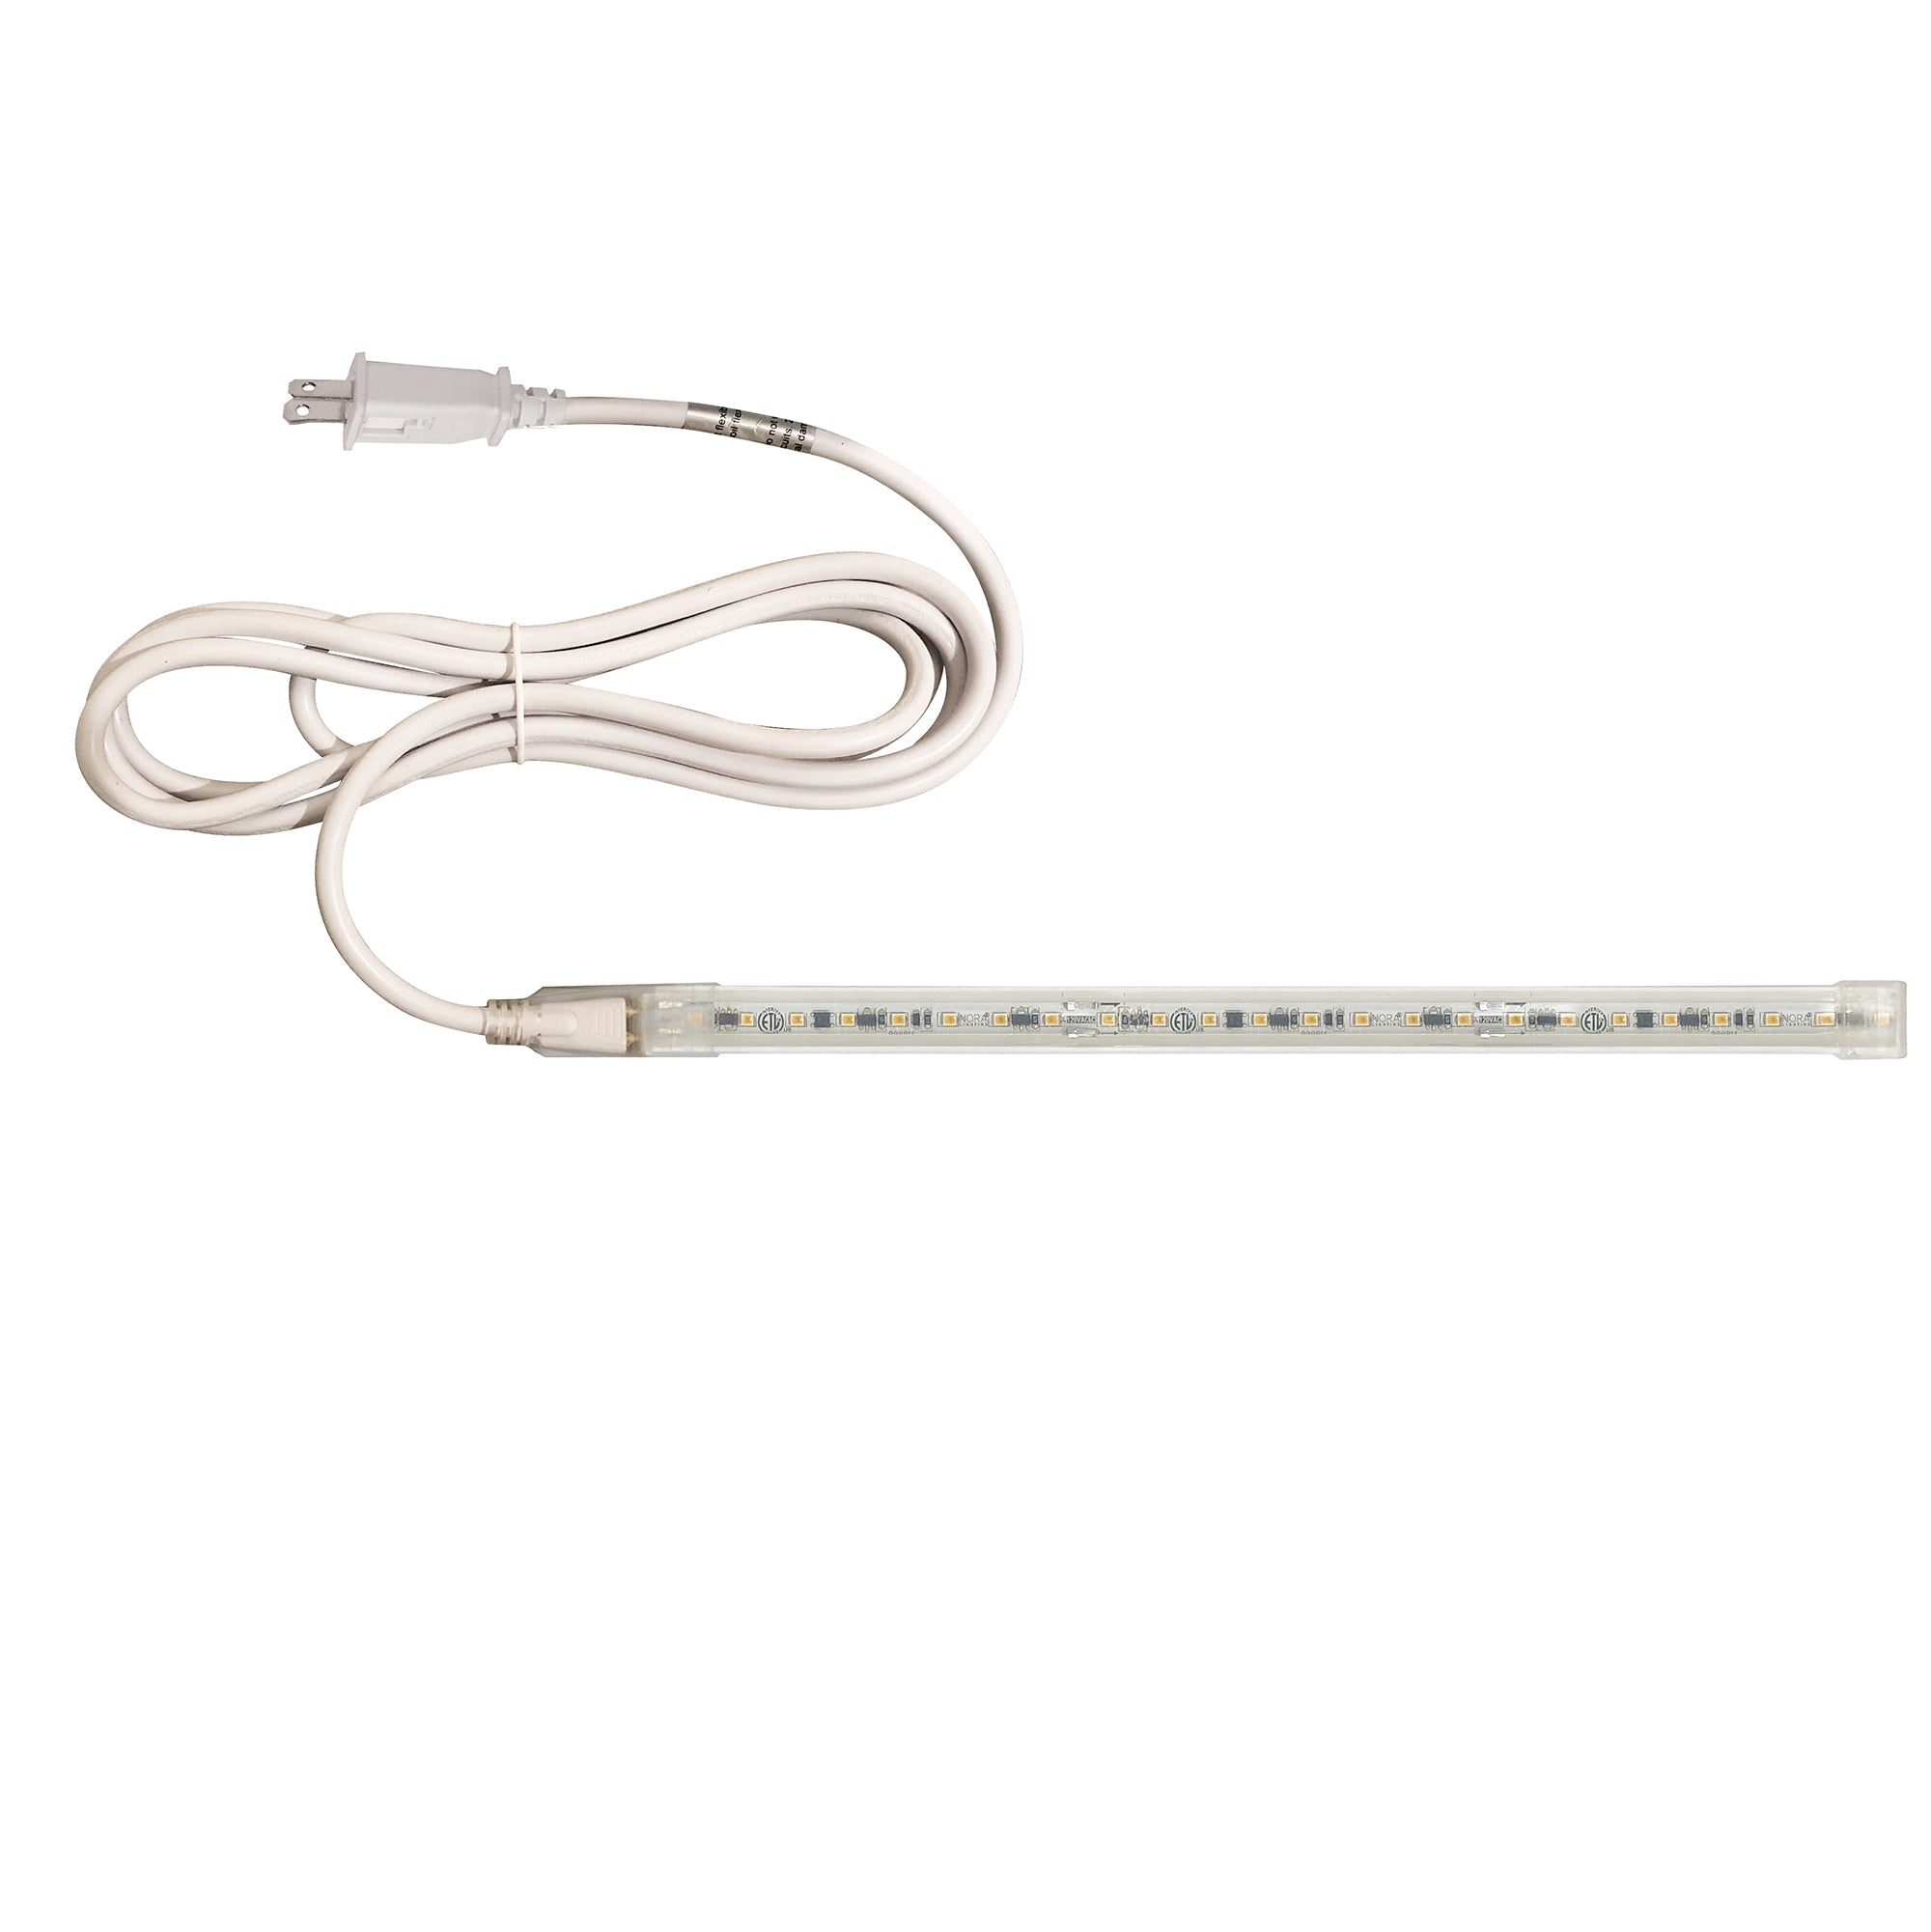 Nora Lighting NUTP13-W88-12-930/CP - Accent / Undercabinet - Custom Cut 88-ft 120V Continuous LED Tape Light, 330lm / 3.6W per foot, 3000K, w/ Mounting Clips and 8' Cord & Plug